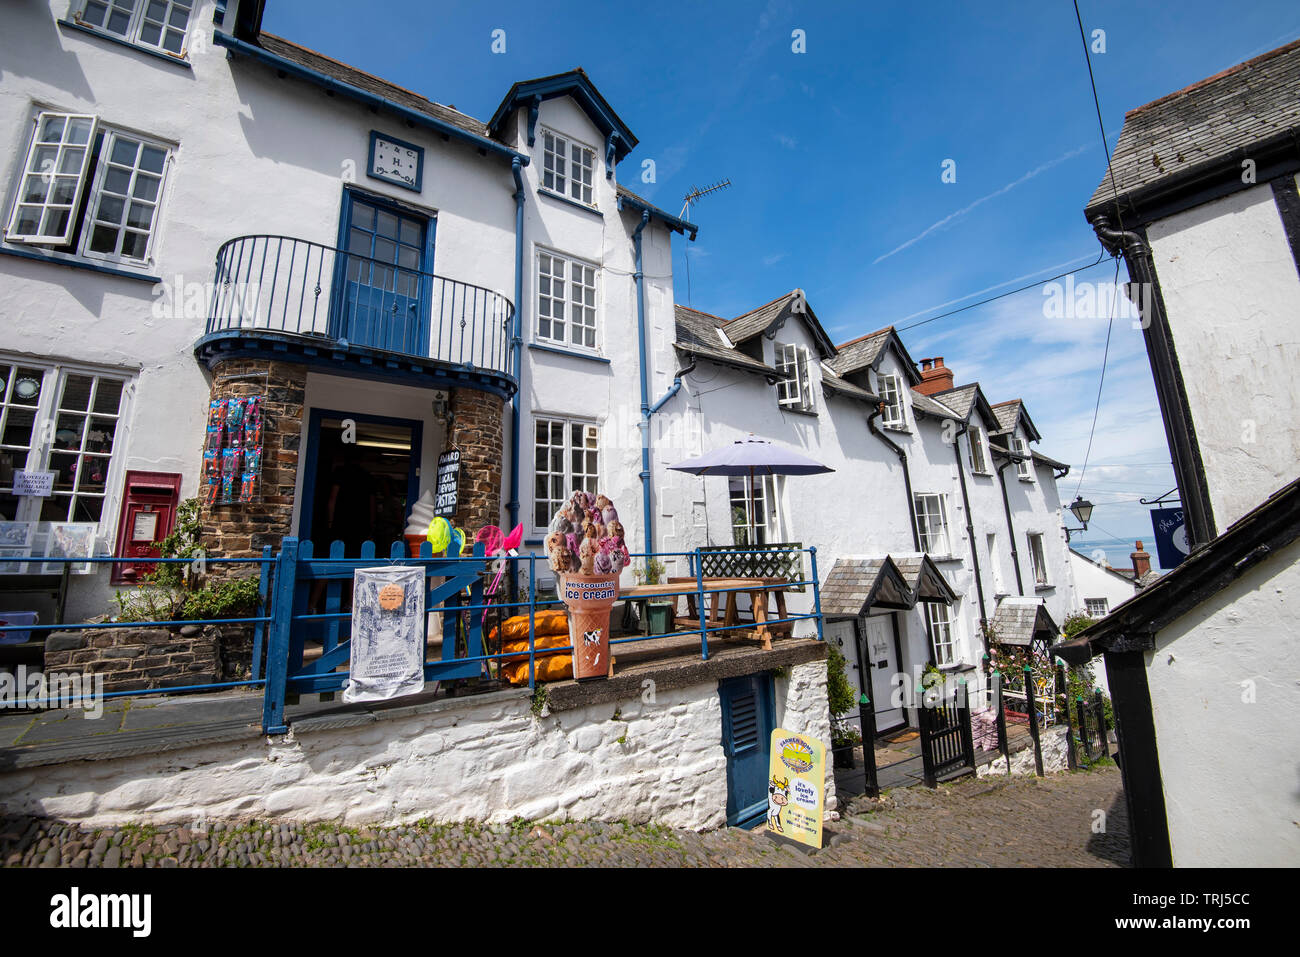 A sunny day on the steep cobbled streets of Clovelly, Devon England UK Stock Photo